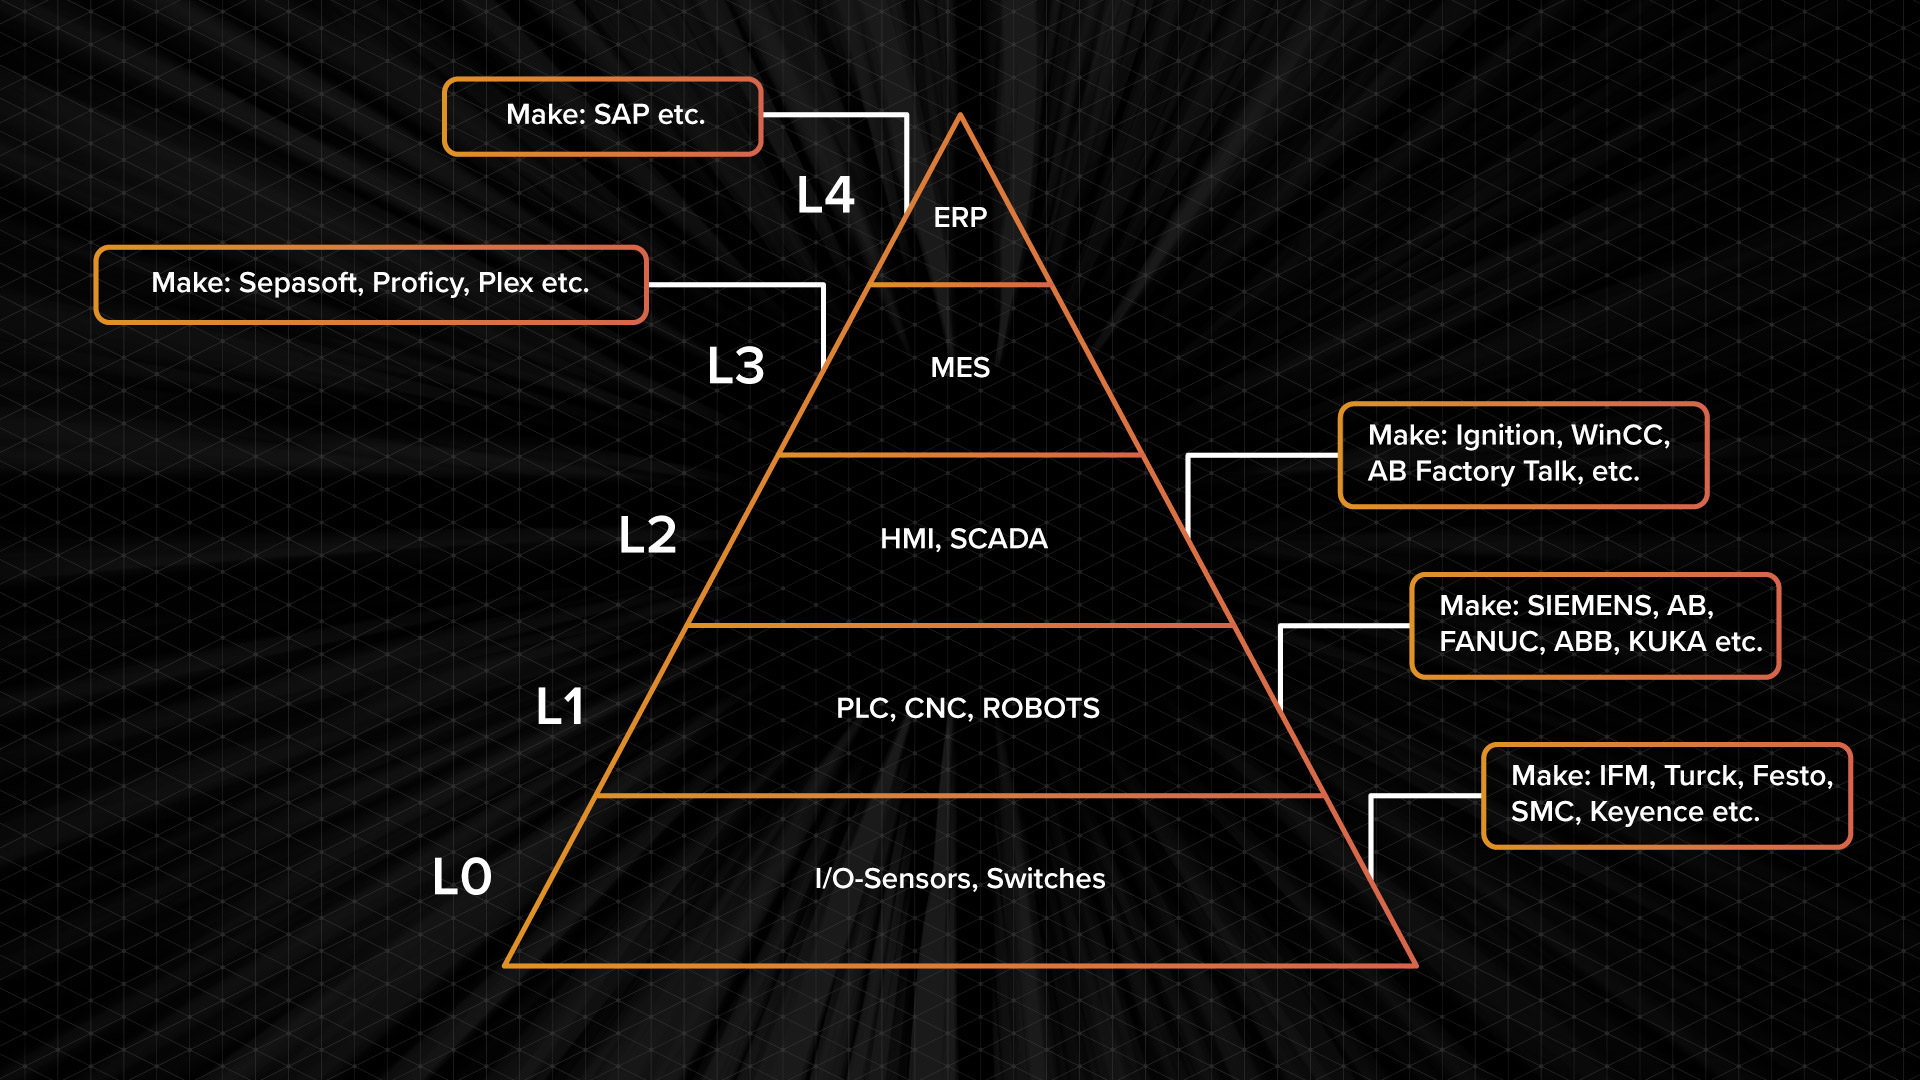 Ignition Automation Pyramid graphic showing the plant floor at the bottom and planning systems at the top. 